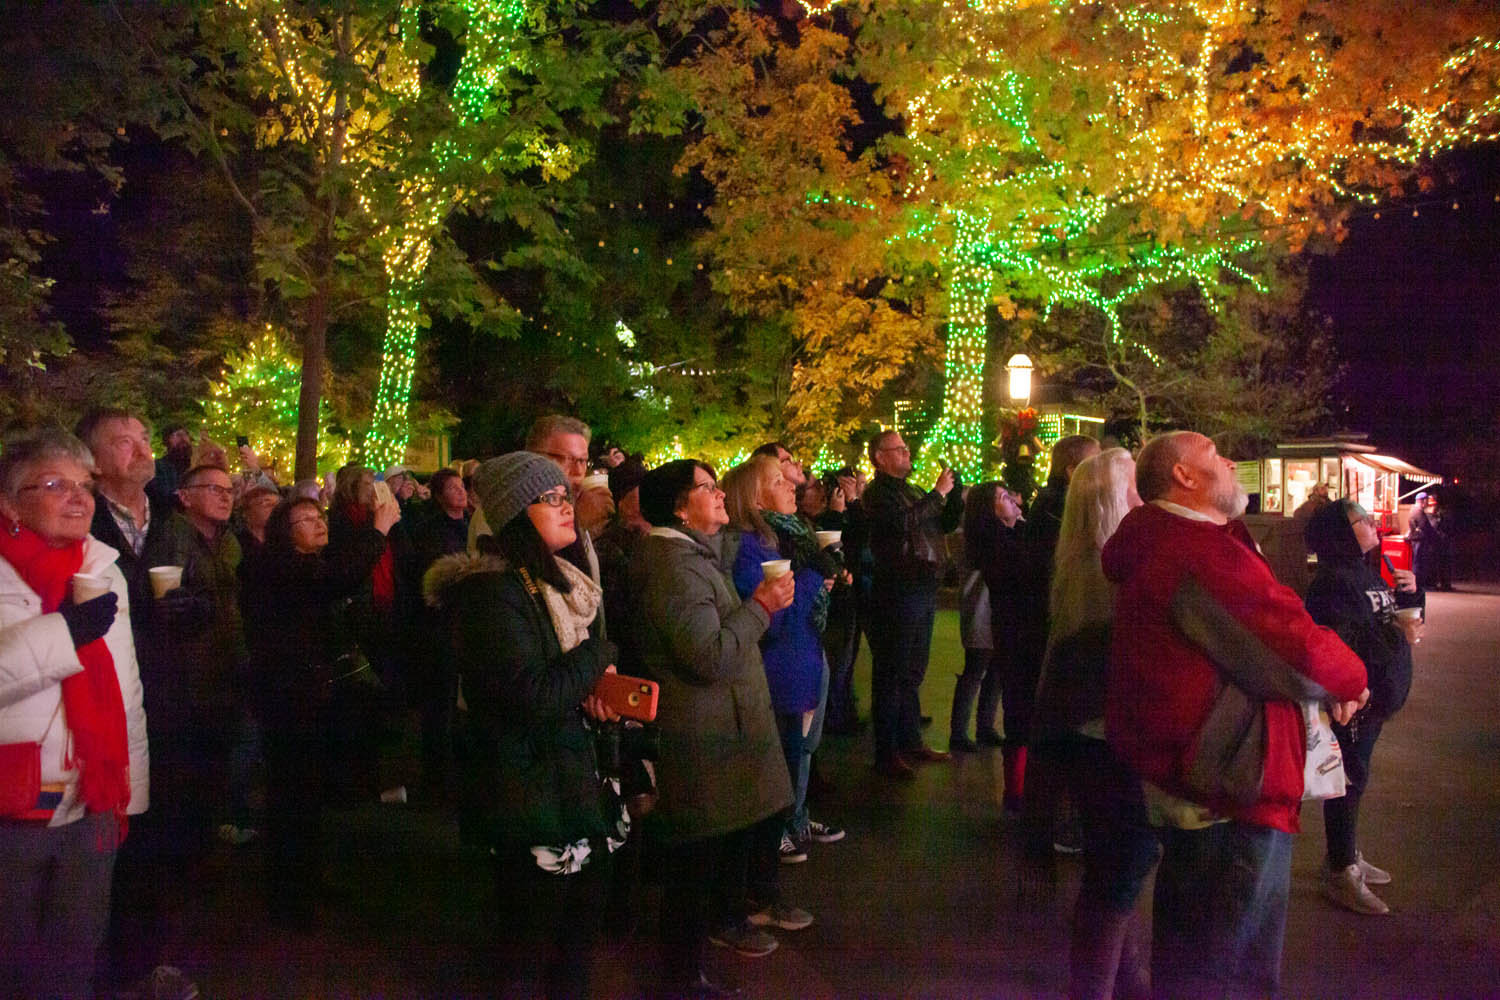 LIGHT THE TOWN SQUARE
Silver Dollar City officials light the new, eight-story Christmas tree for the first time publicly Nov. 1 during a media preview event. It kicked off the theme park’s Old Time Christmas season, which runs through Dec. 30. Silver Dollar City hired Atlanta-based S4 Lights to design the $1.5 million tree and light show throughout its Town Square. Officials say there are 6.5 million lights throughout the park during the season.